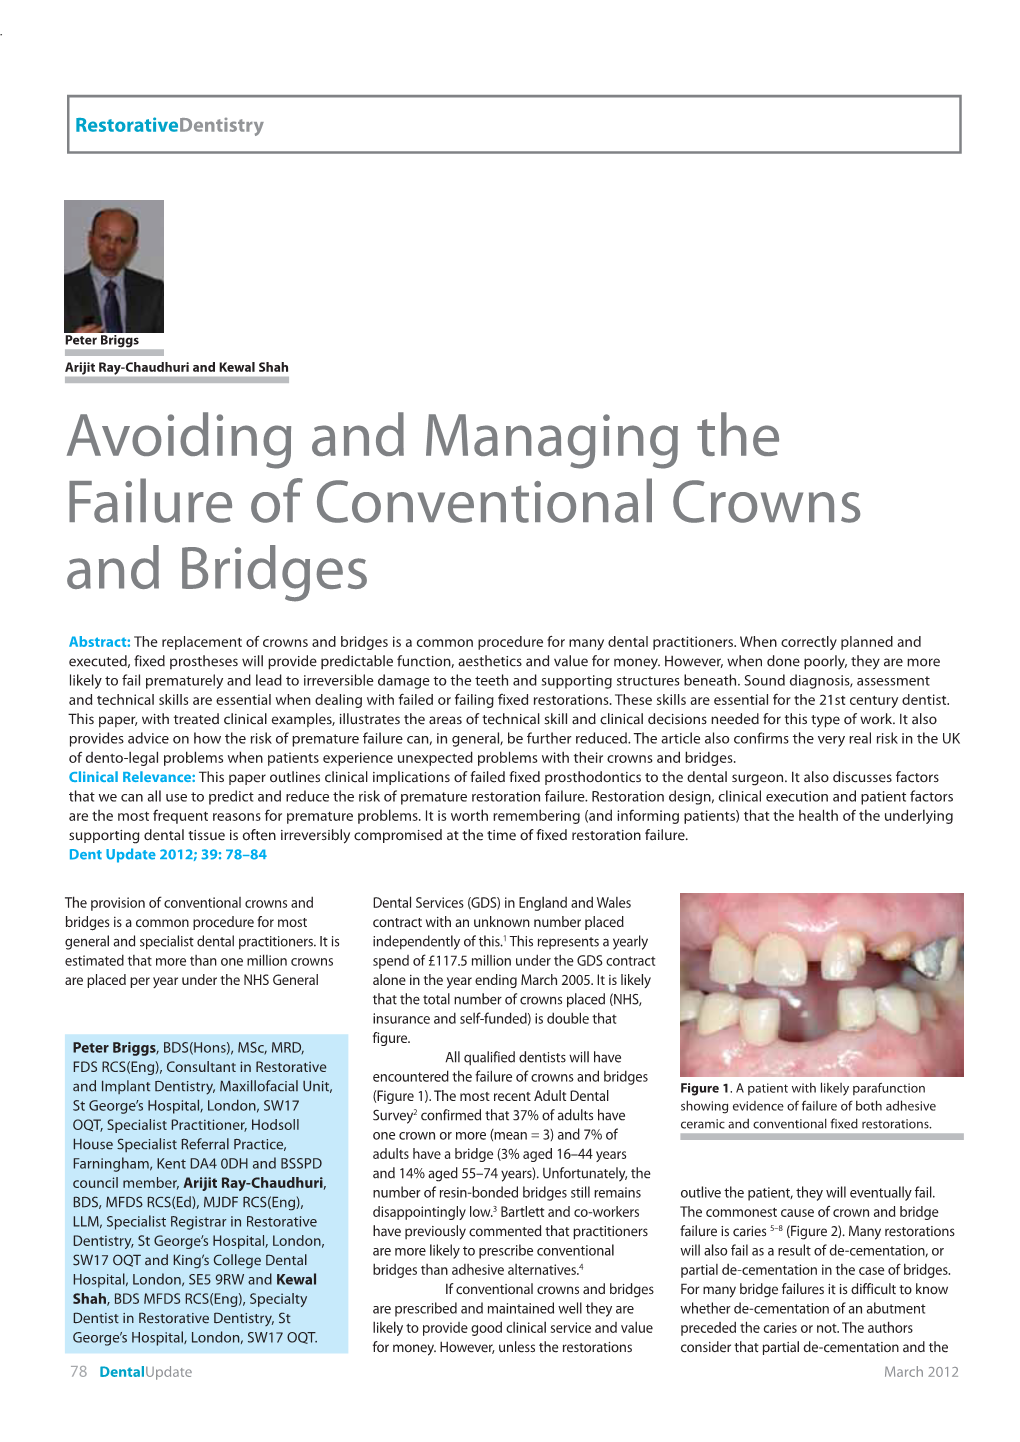 Avoiding and Managing the Failure of Conventional Crowns and Bridges